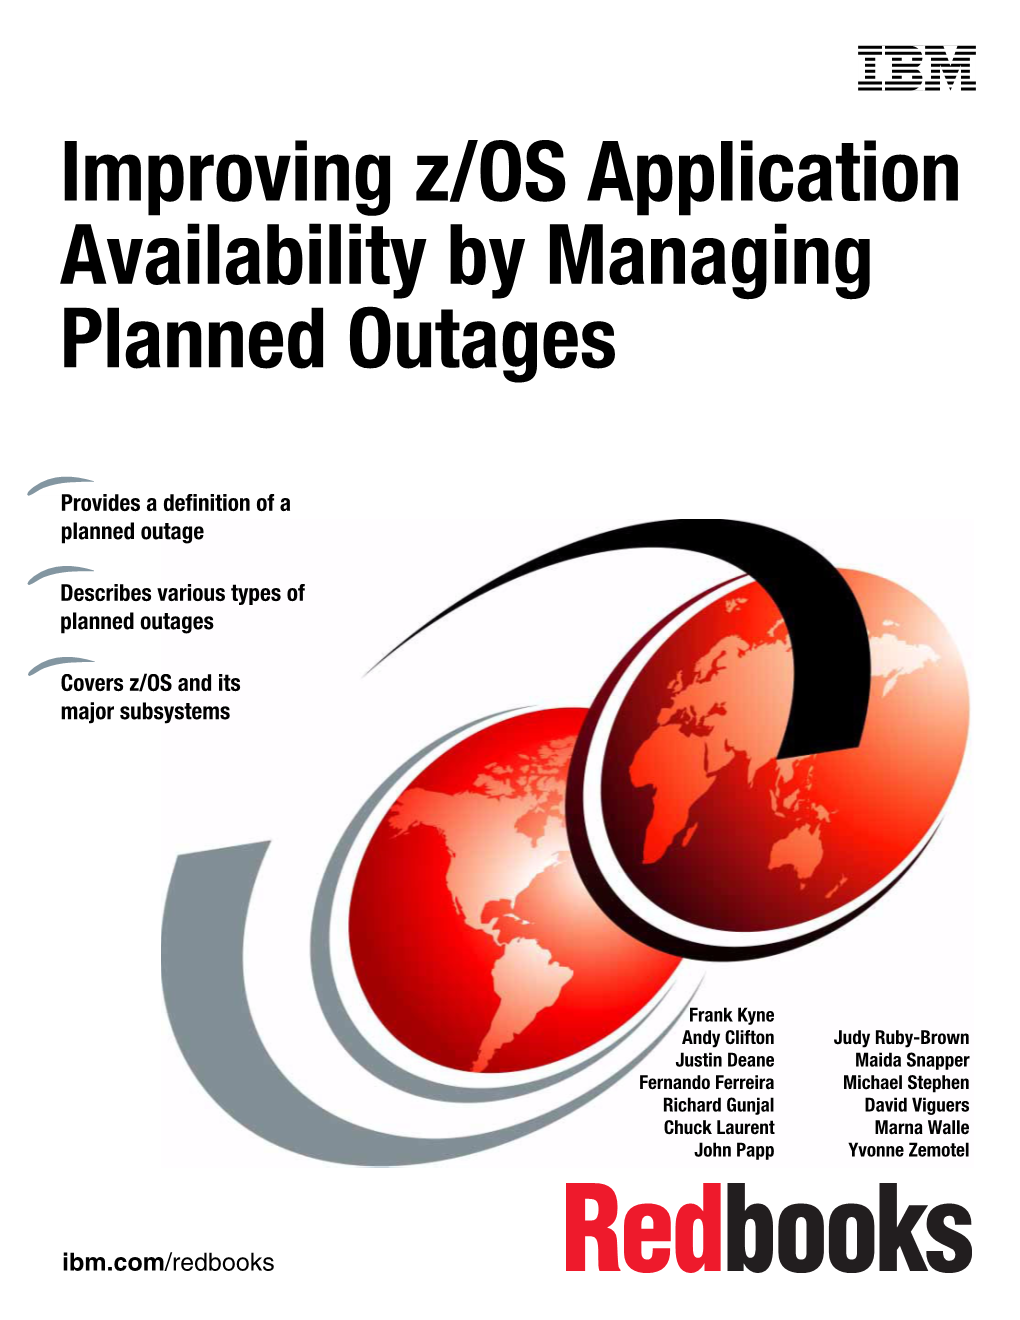 Improving Z/OS Application Availability by Managing Planned Outages